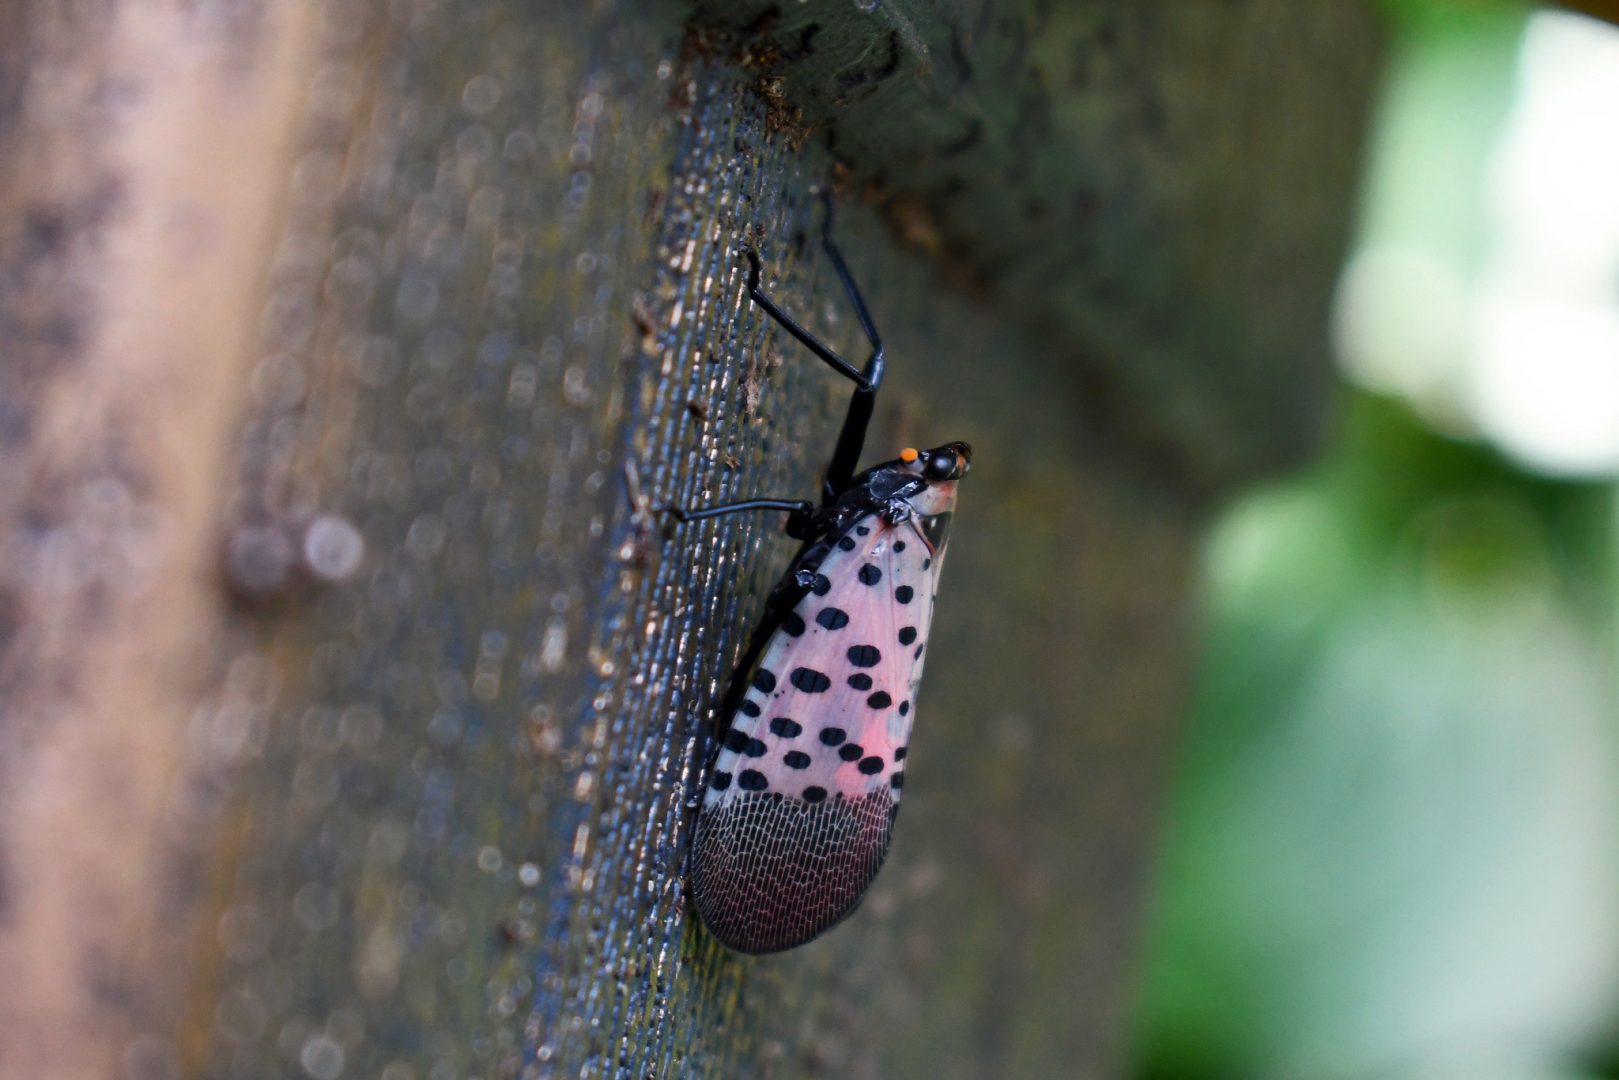 An adult spotted lanternfly in Salford Township, Montgomery county, Pennsylvania.